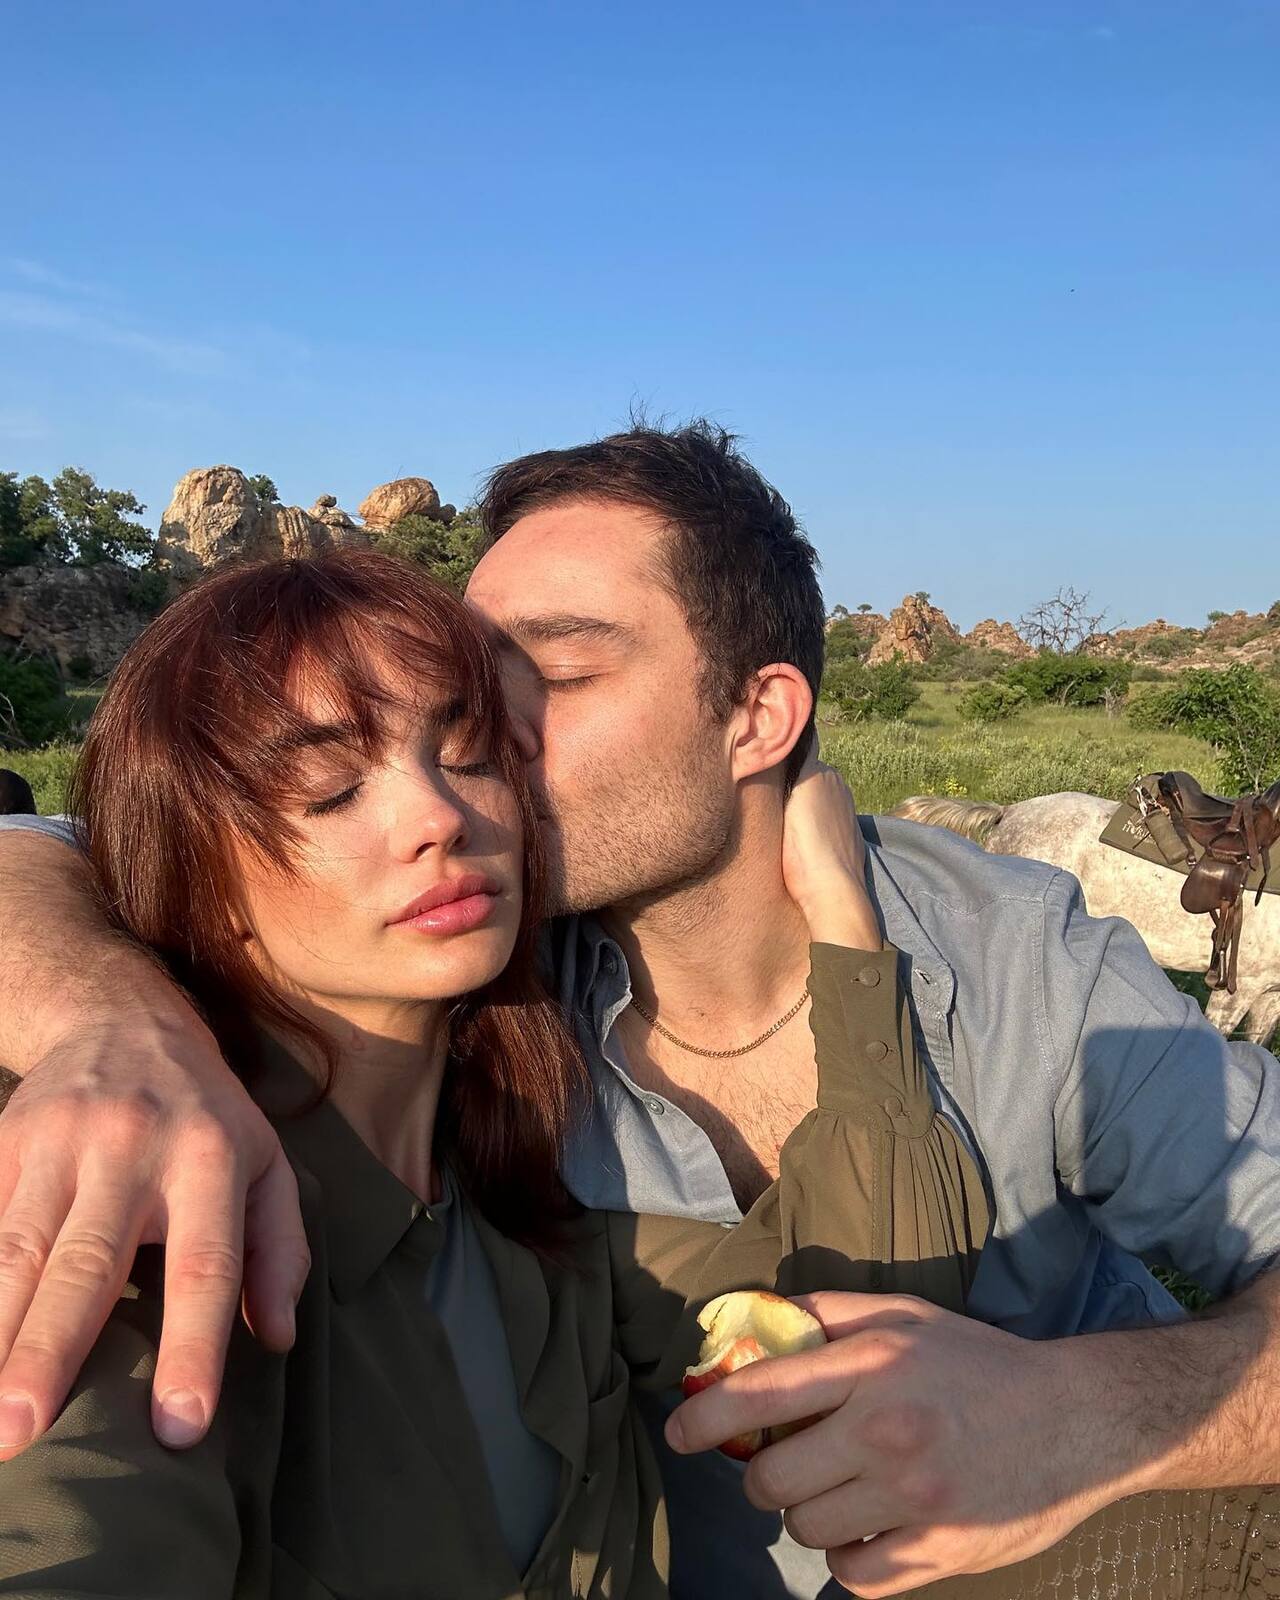 From cosy getaways to sun-kissed beaches, the couple's social media accounts are flooded with adorable pictures of them together